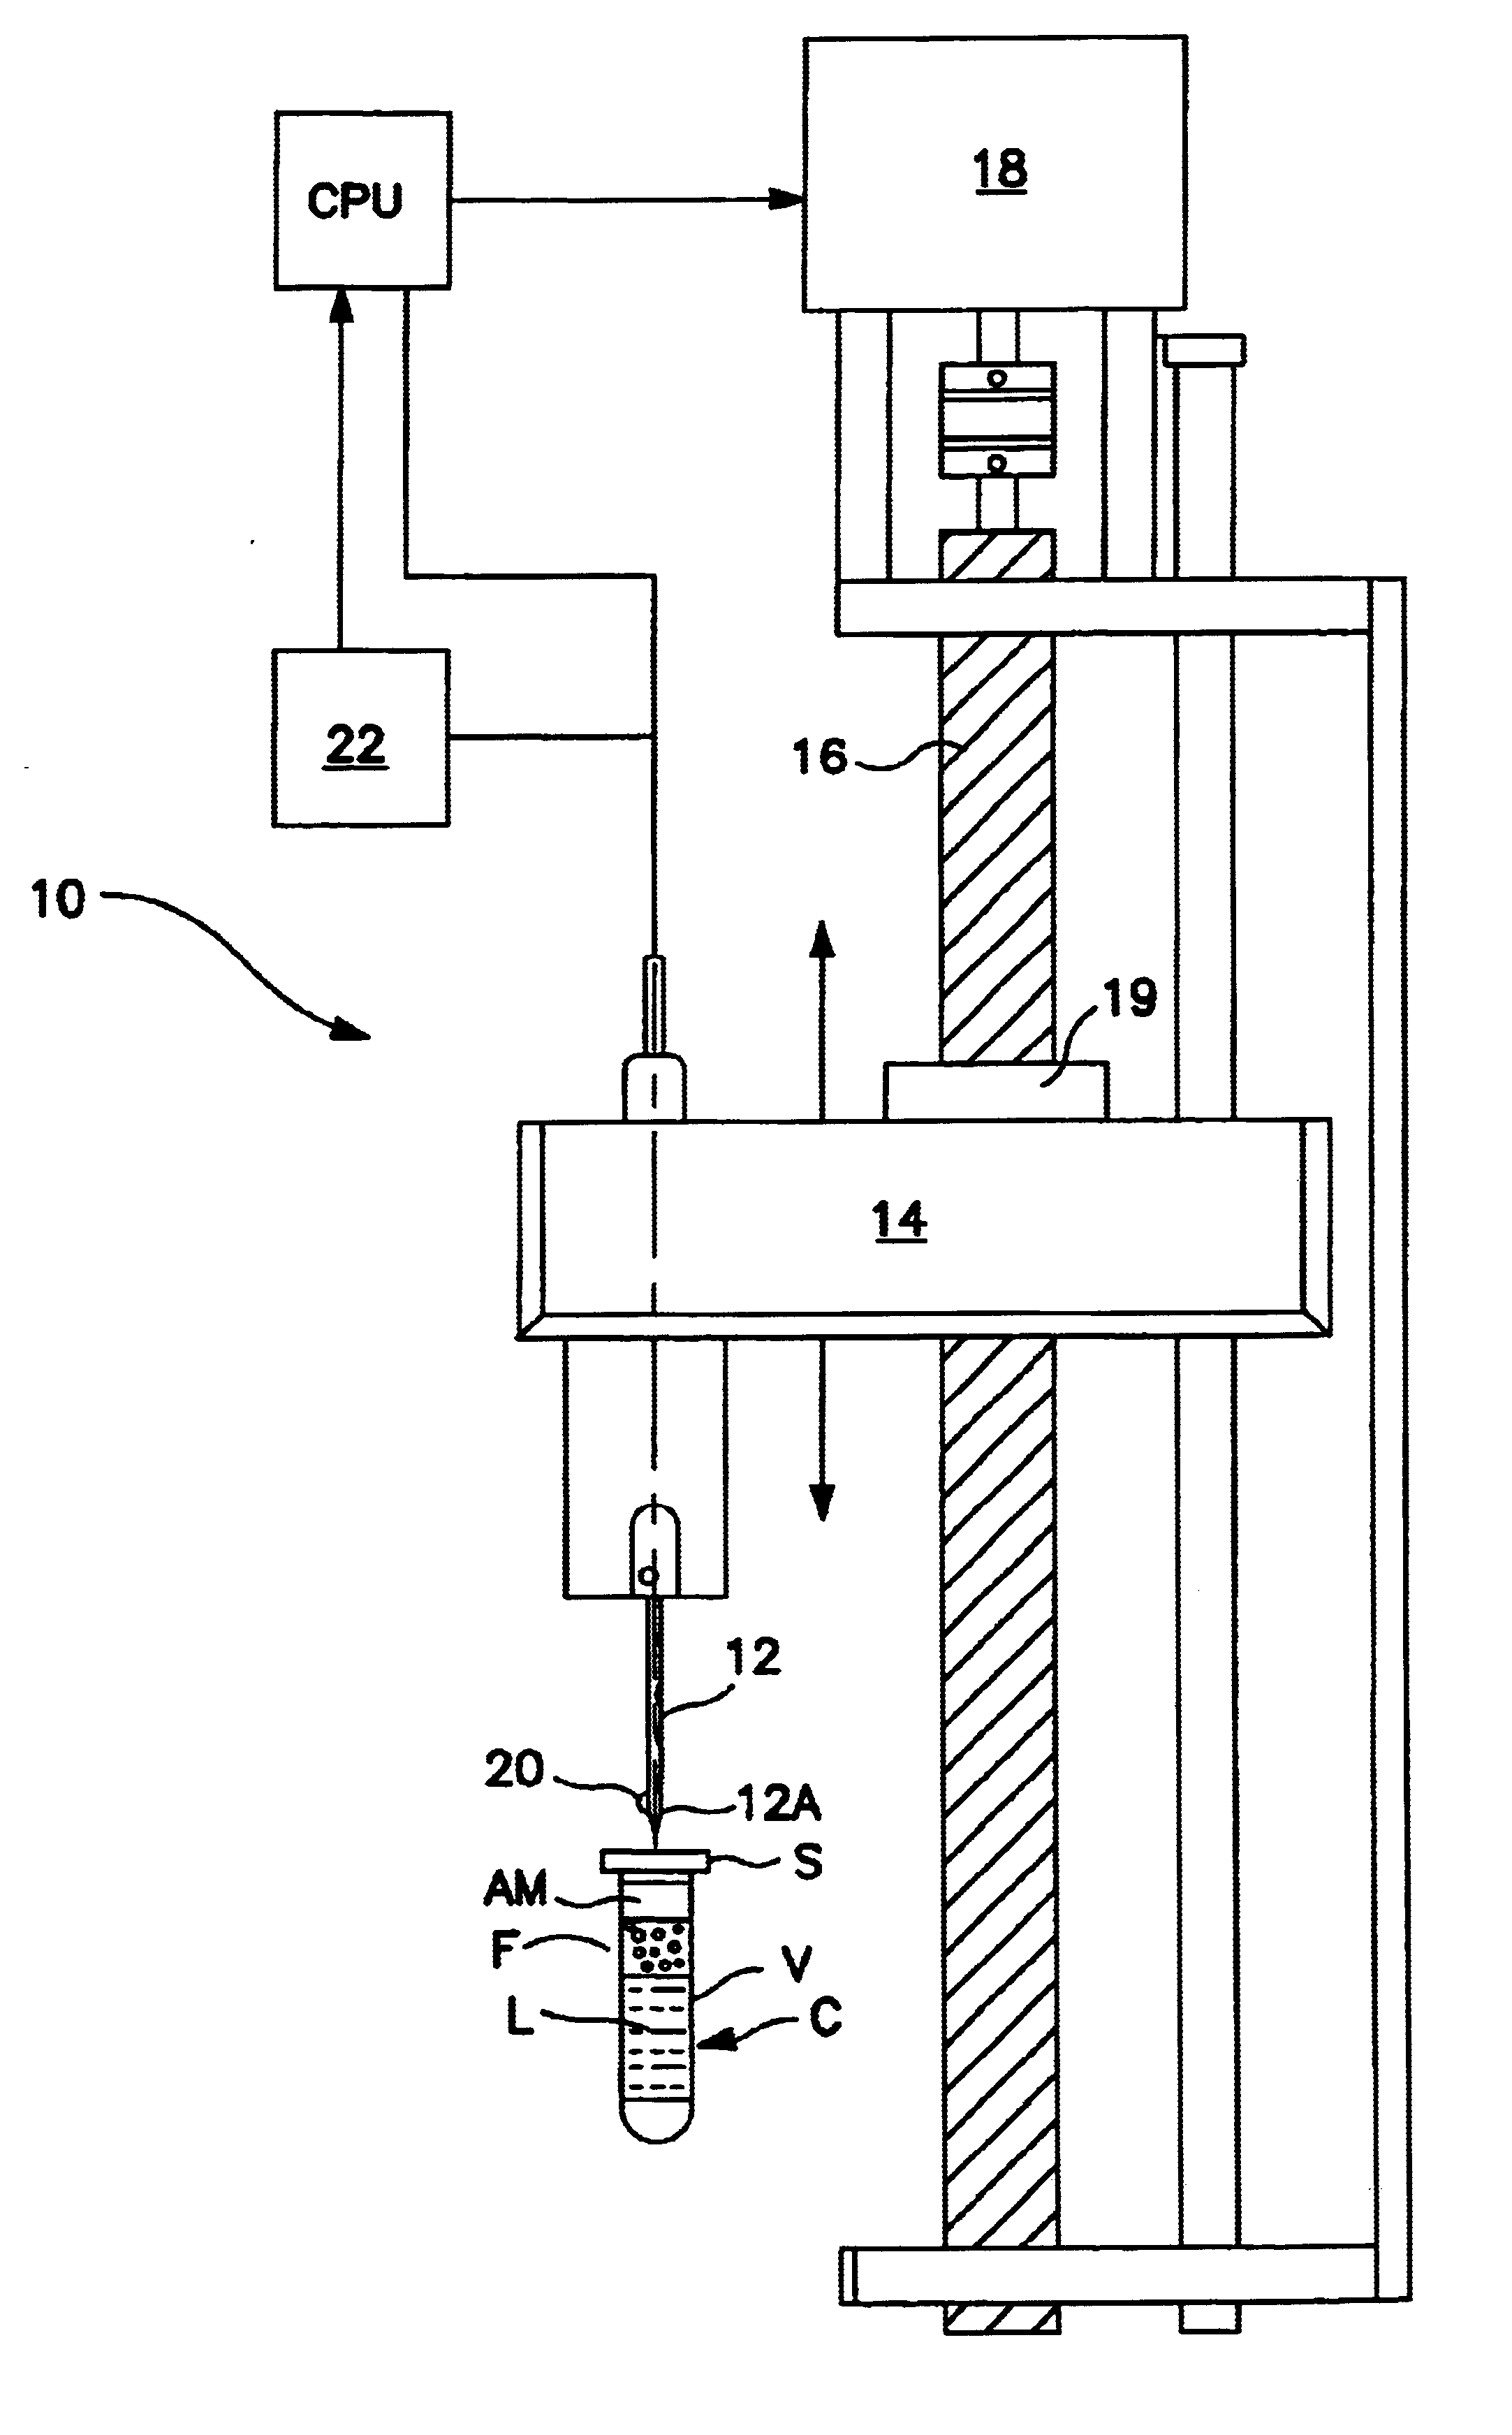 Method and apparatus for aspirating liquid from a container